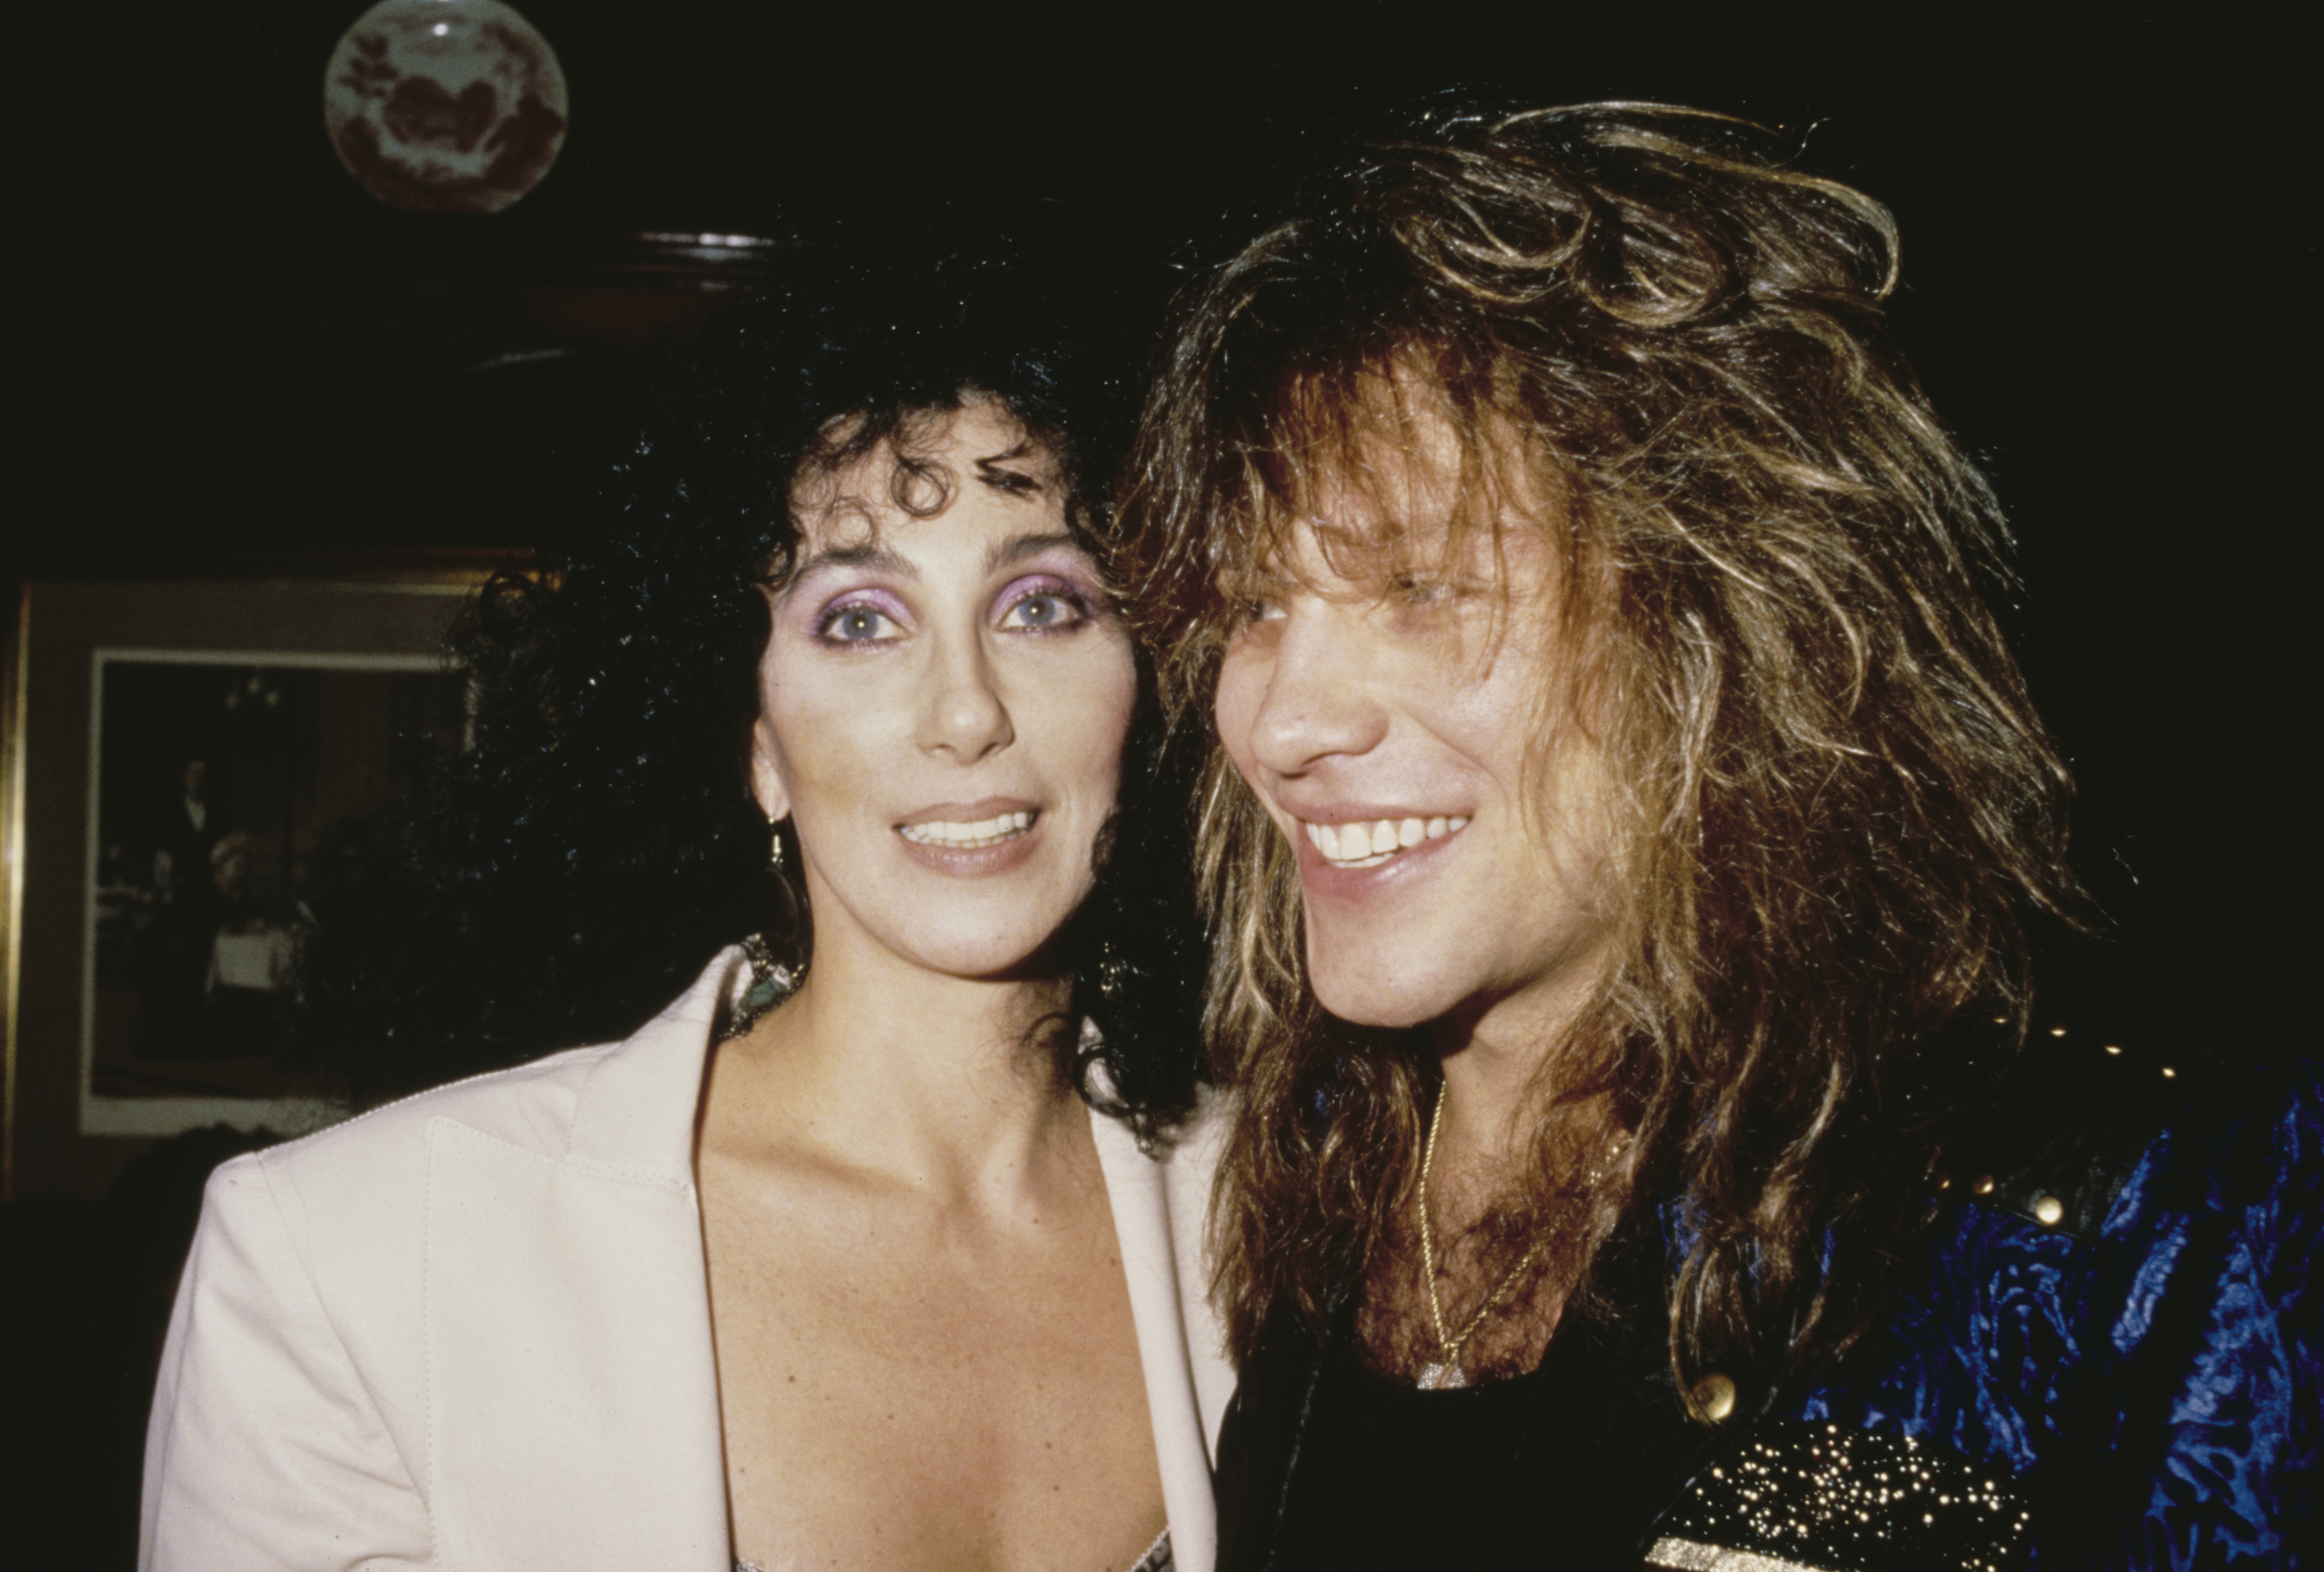 Cher and Jon Bon Jovi at the 15th Annual American Music Awards, held at the Shrine Auditorium in Los Angeles, California, 25th January 1988 | Source: Getty Images